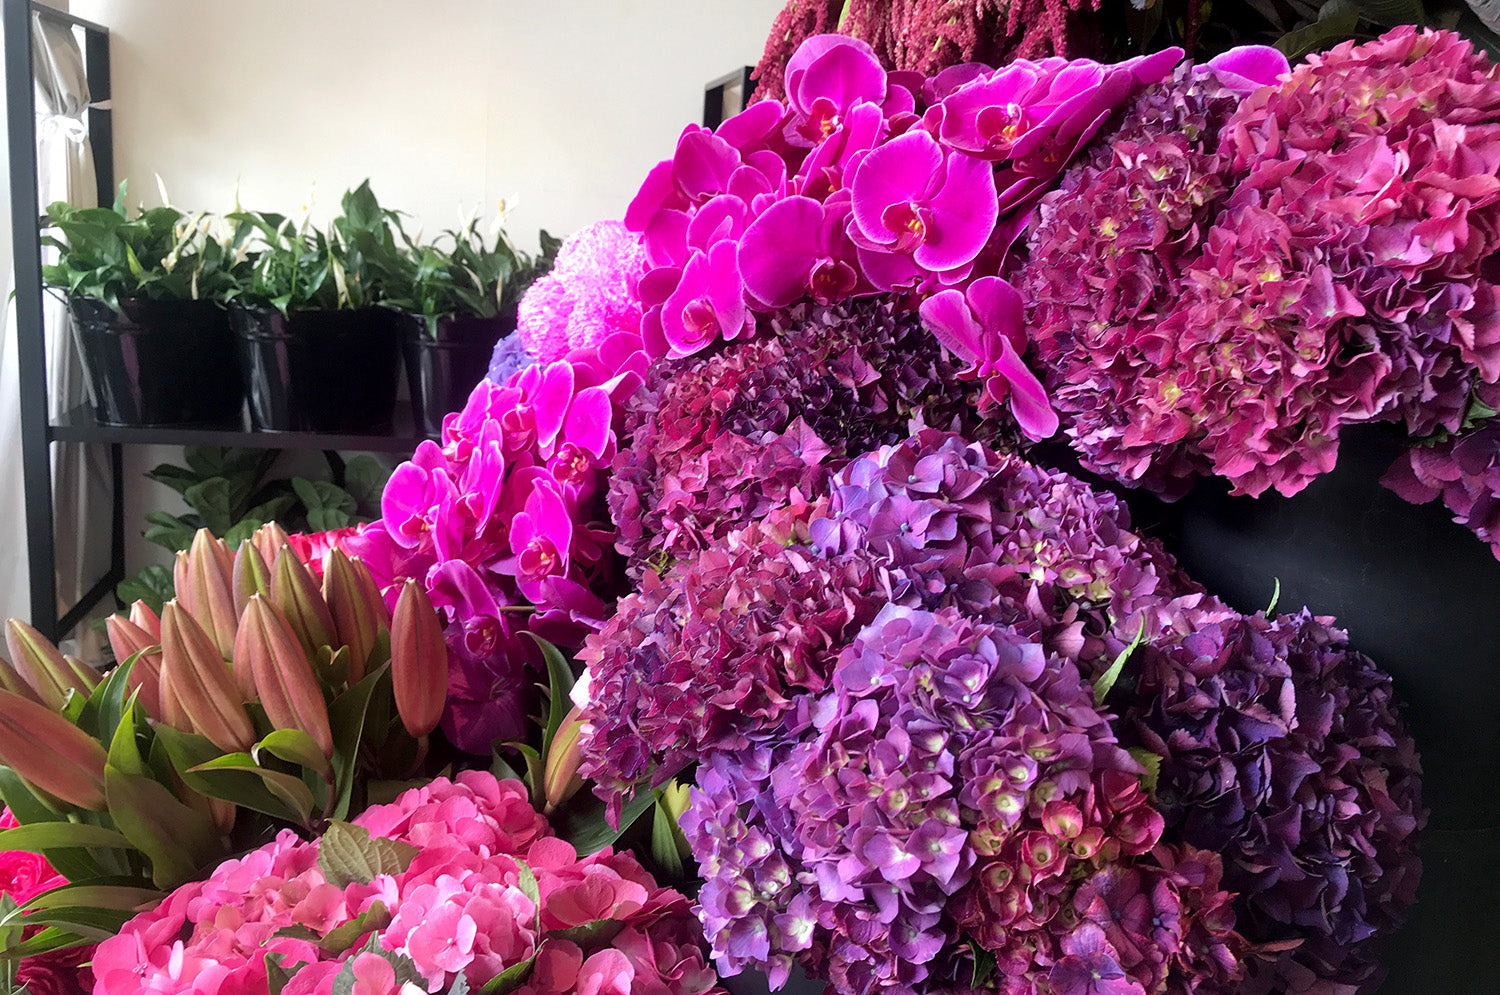 Melbourne florist with hydrangea being displayed on shop stands